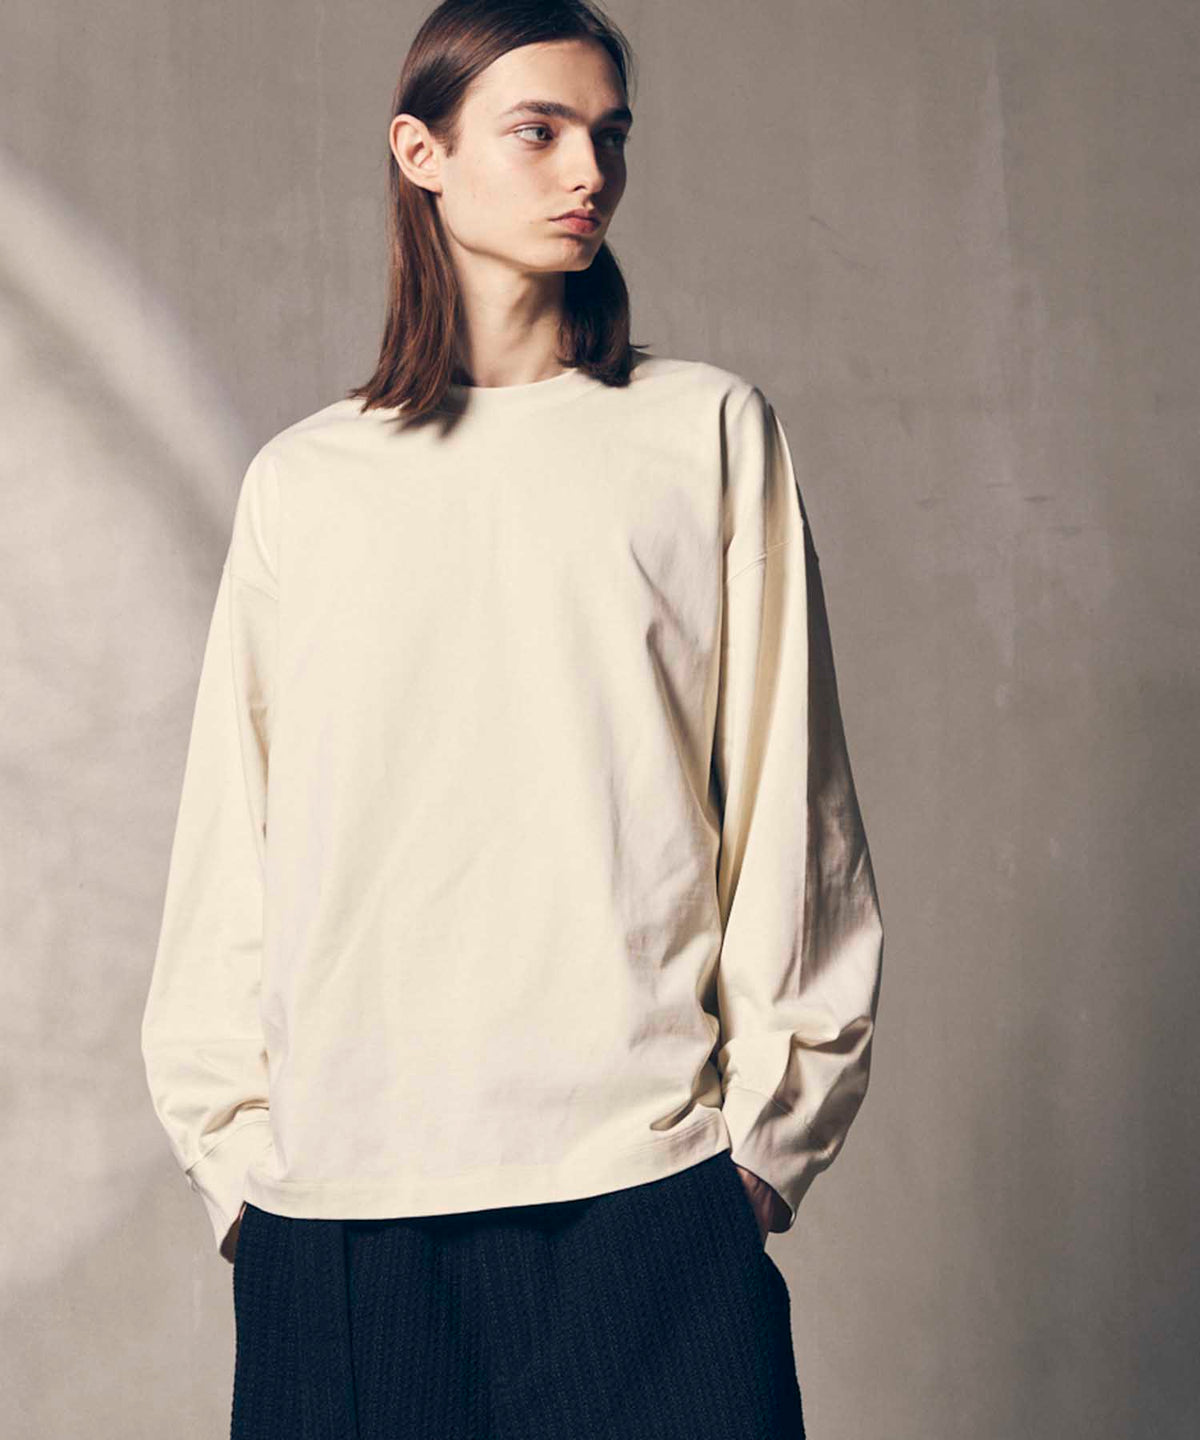 【SALE】Heavy-Weight Cotton Prime-Over Crew Neck Long Sleeve T-Shirt